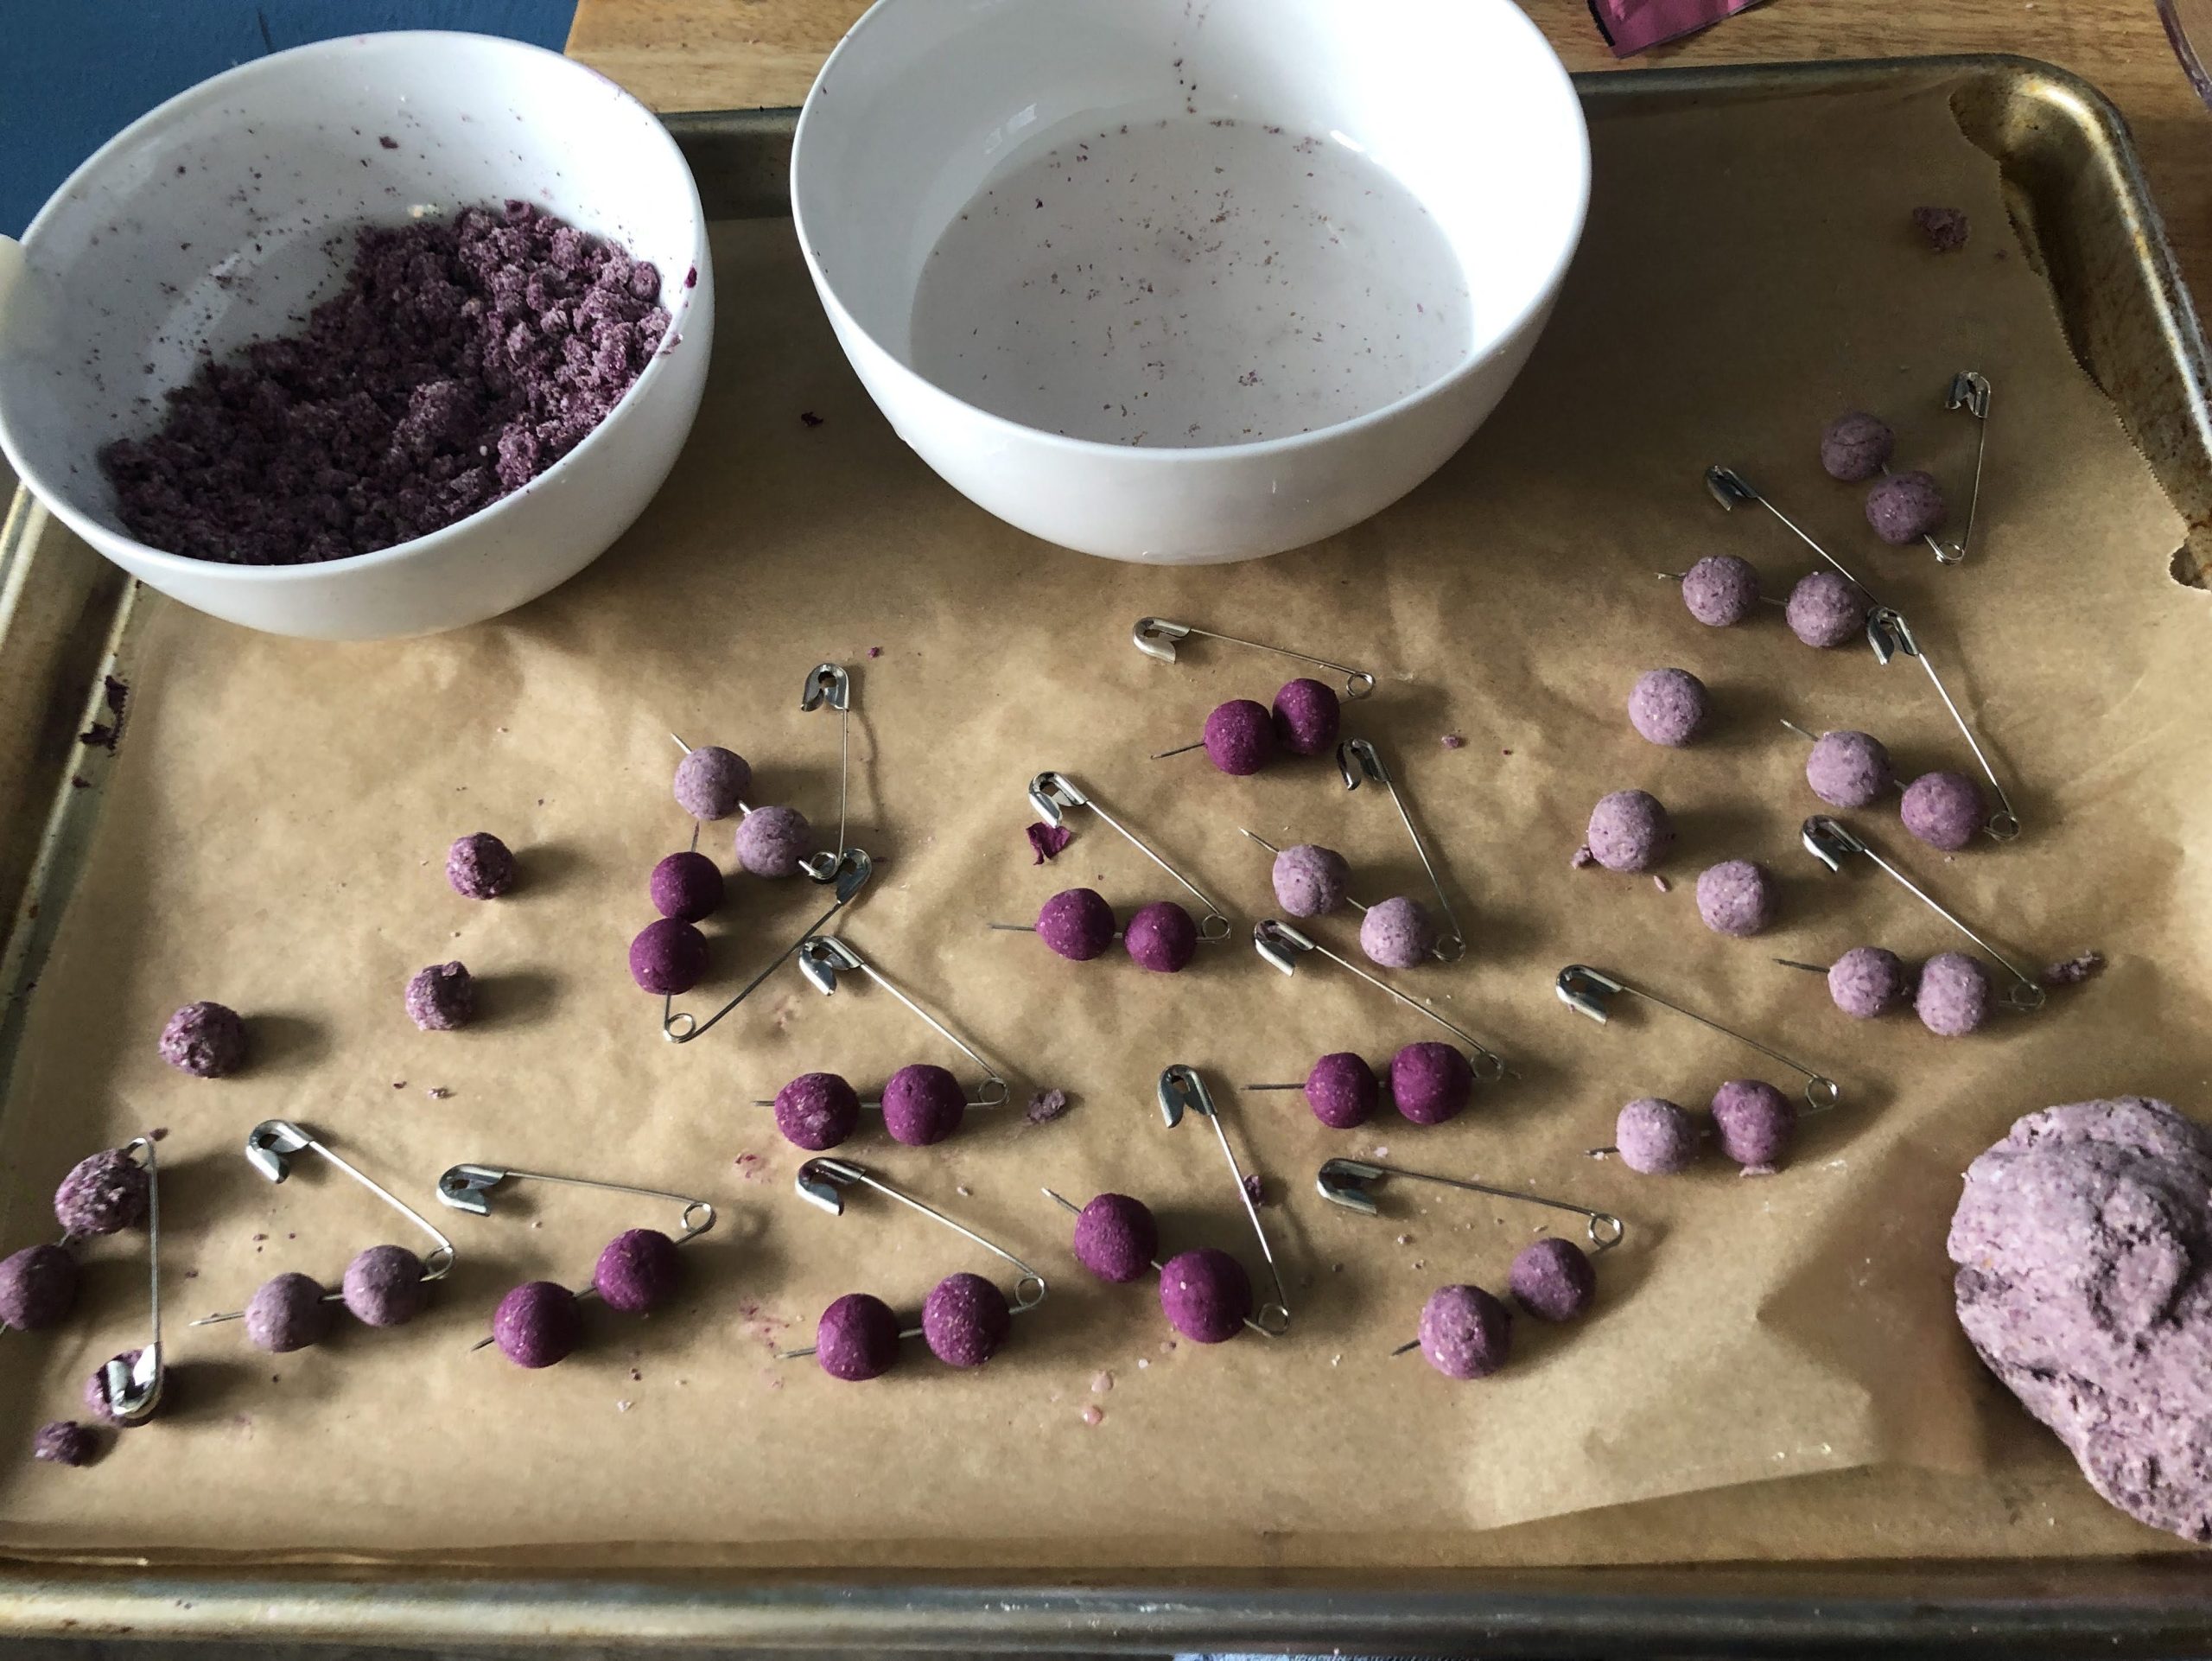 round balls of purple and grey clay impaled on safety pins.